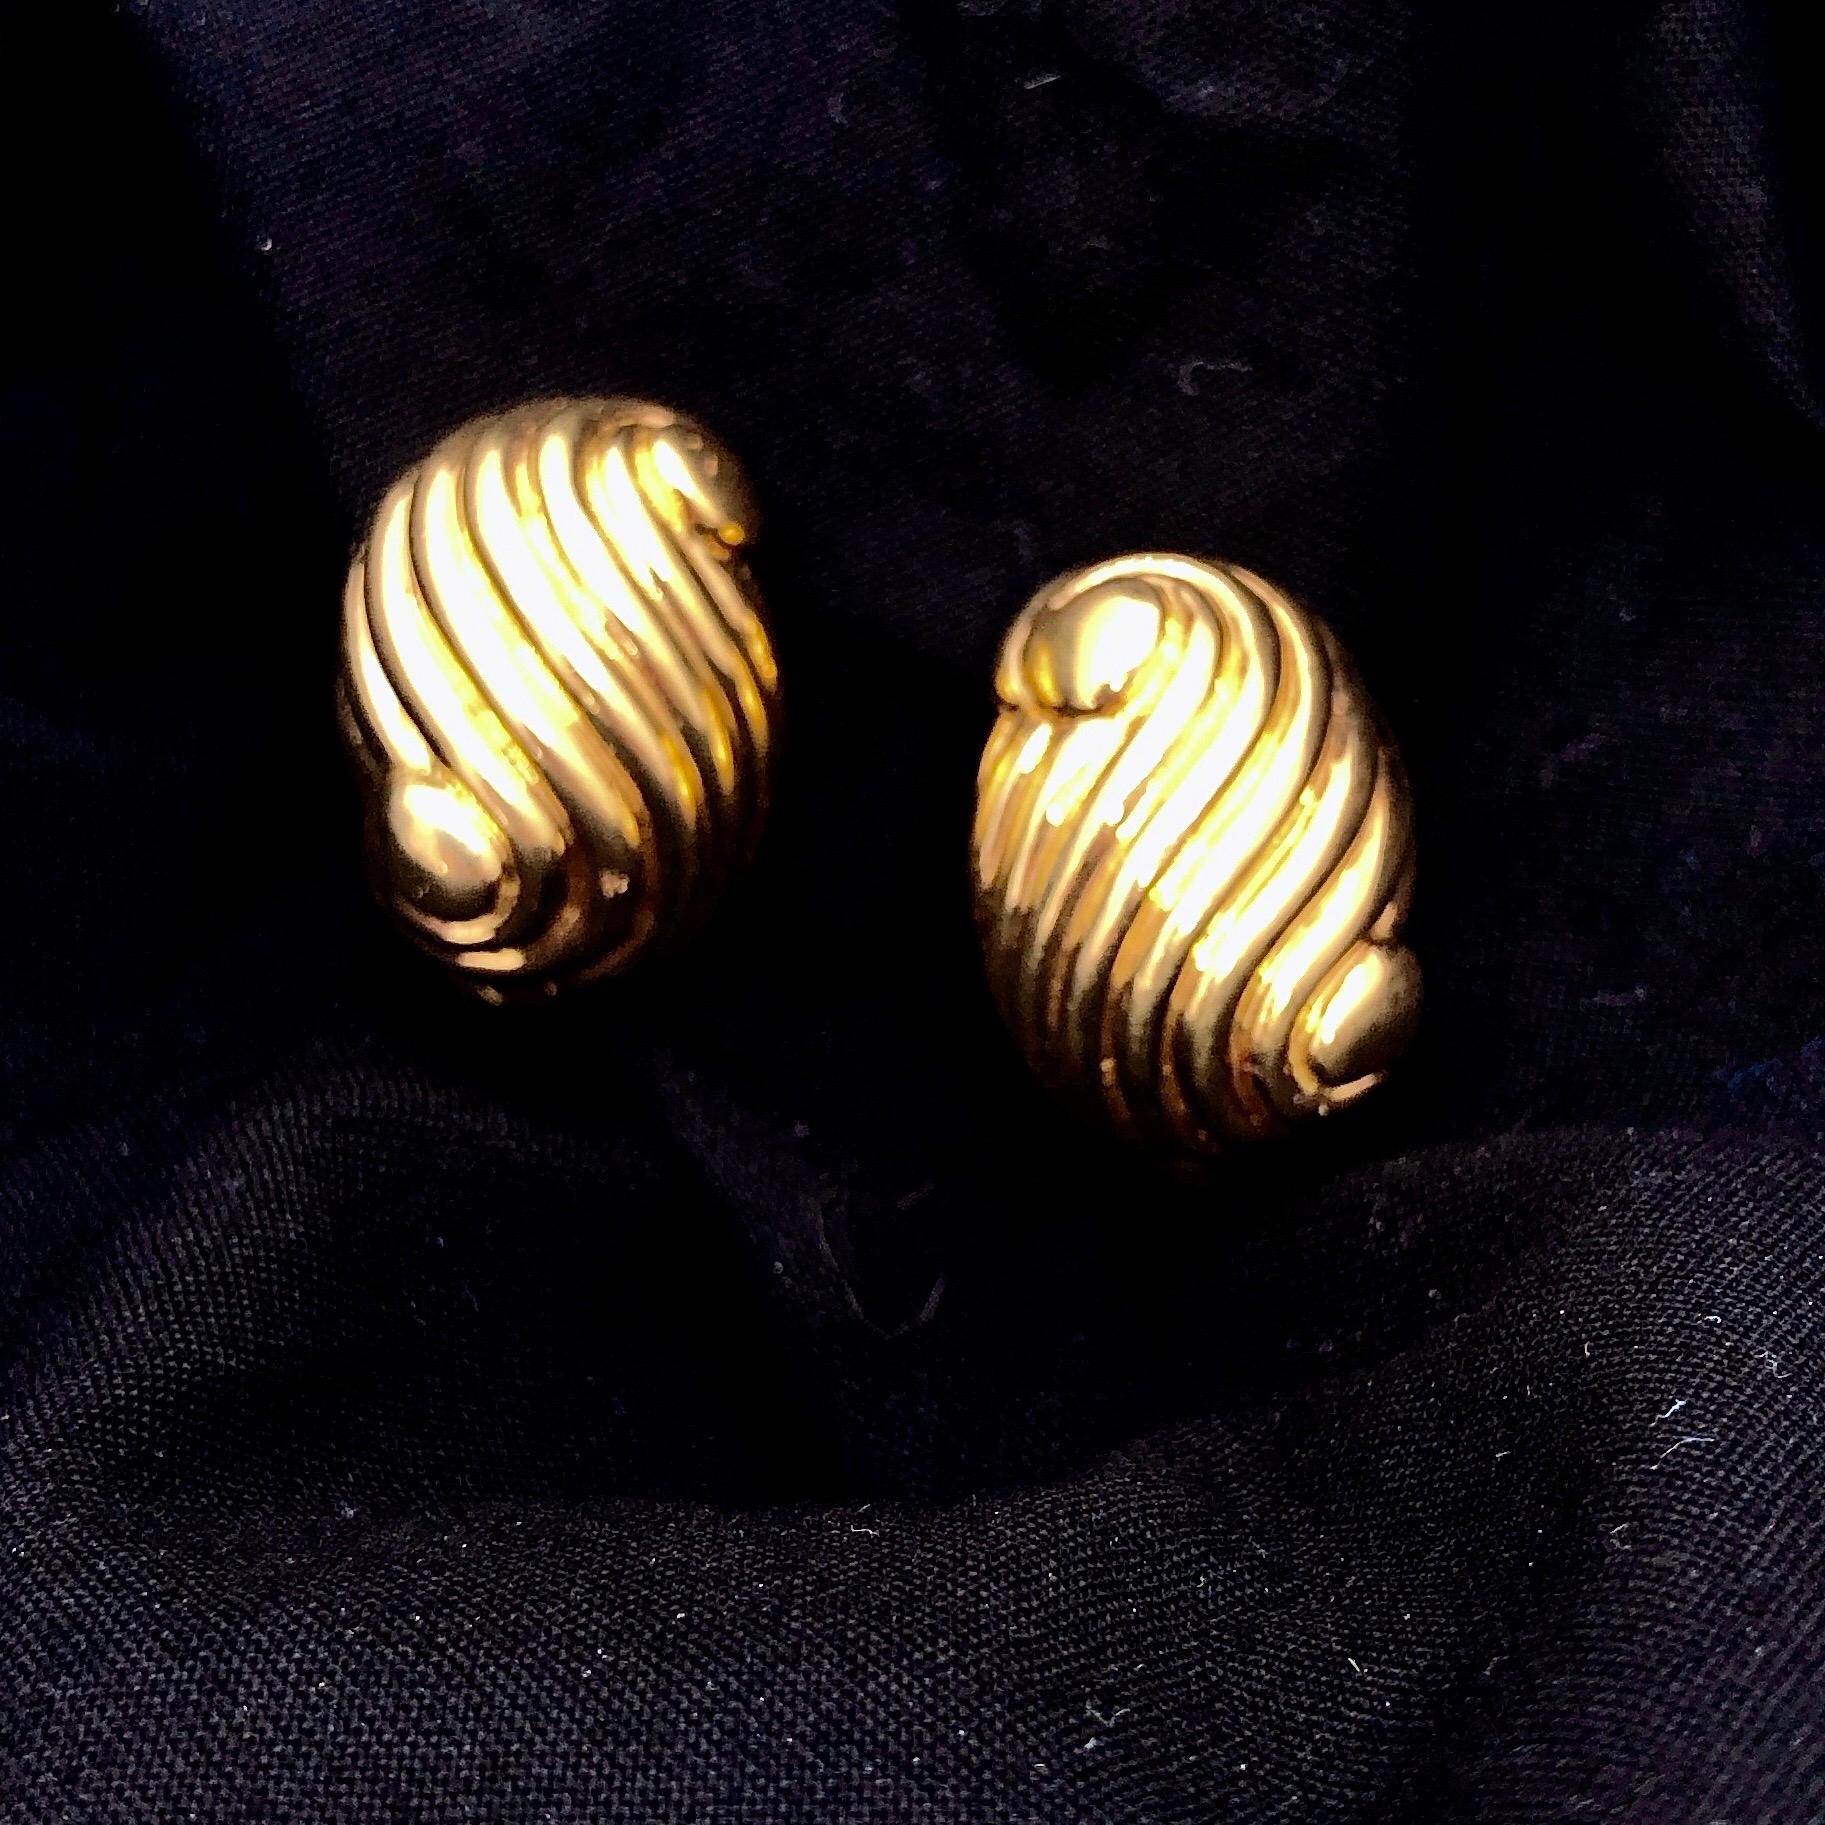 This vintage pair of David Webb, 18k gold earrings are melon fluted in such a clever way as to create a pleasing visual sense of motion. They are substantial, measuring 1 1/8 inches top to bottom and 3/4 inches in width. Earring backs are struck